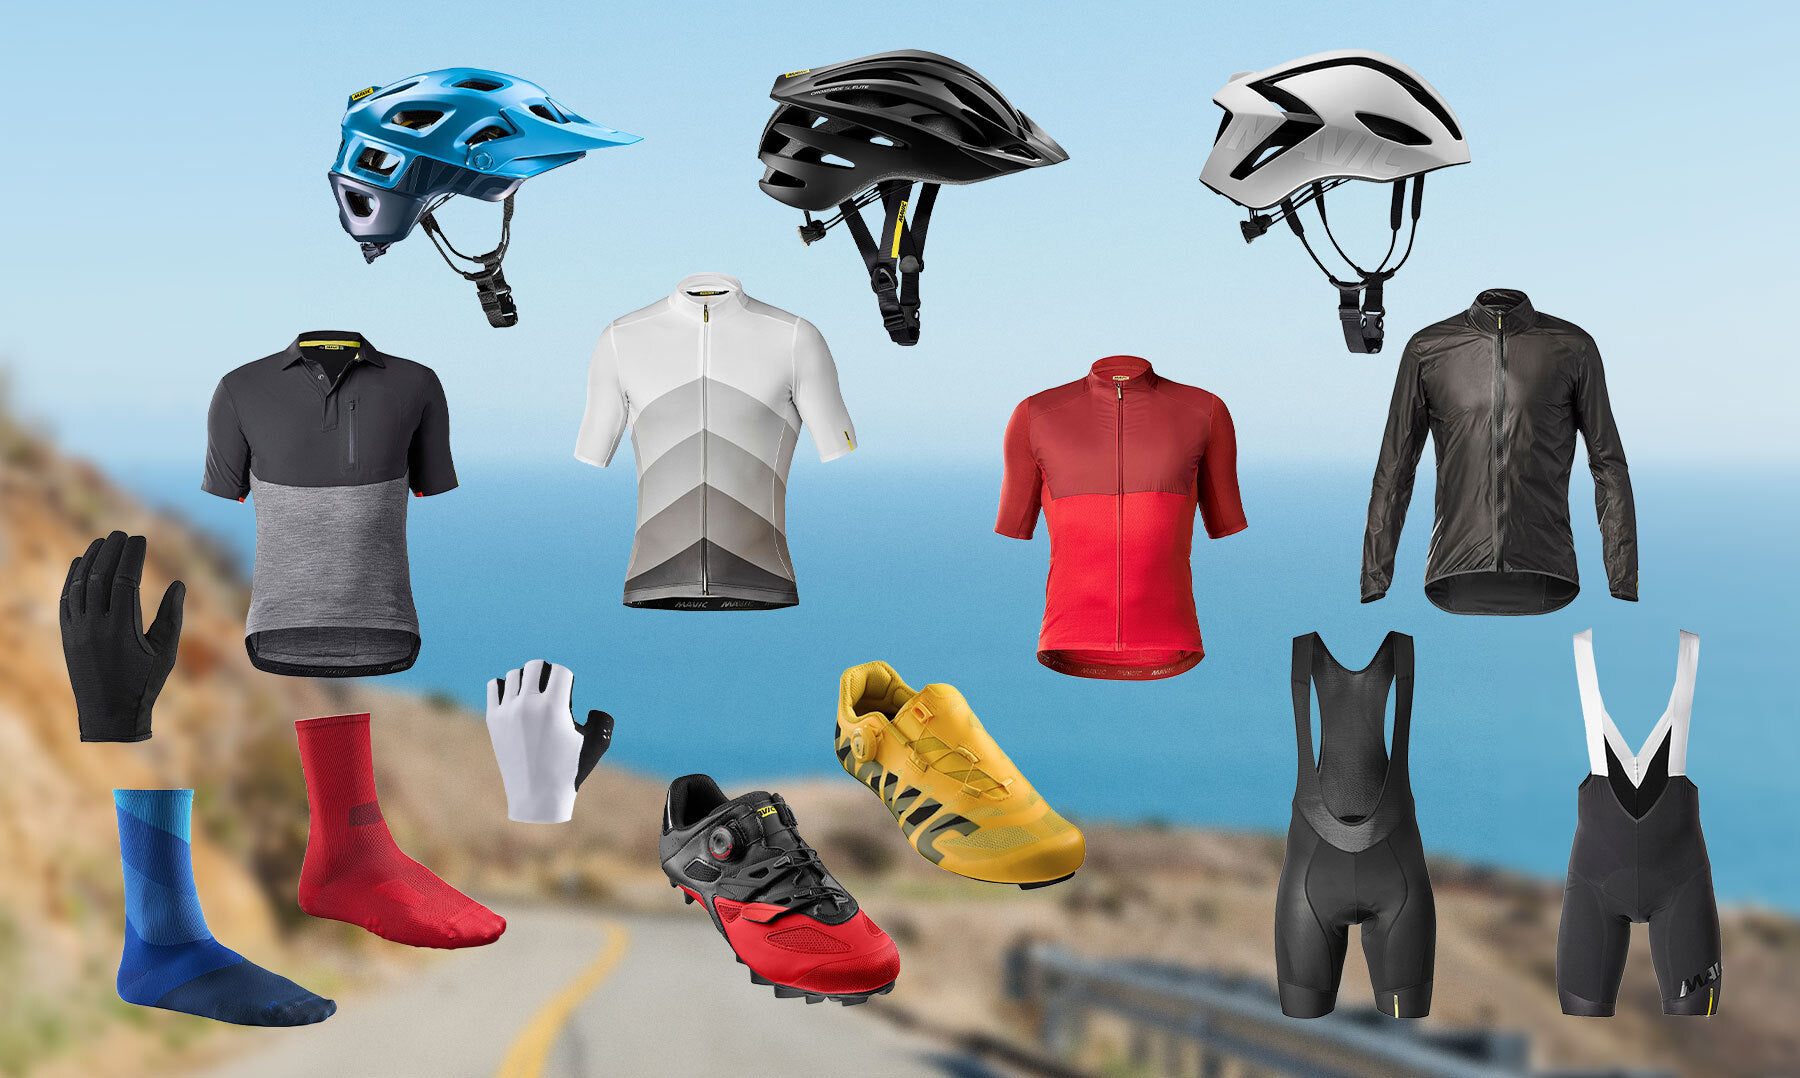 The best Mavic apparel on sale right now